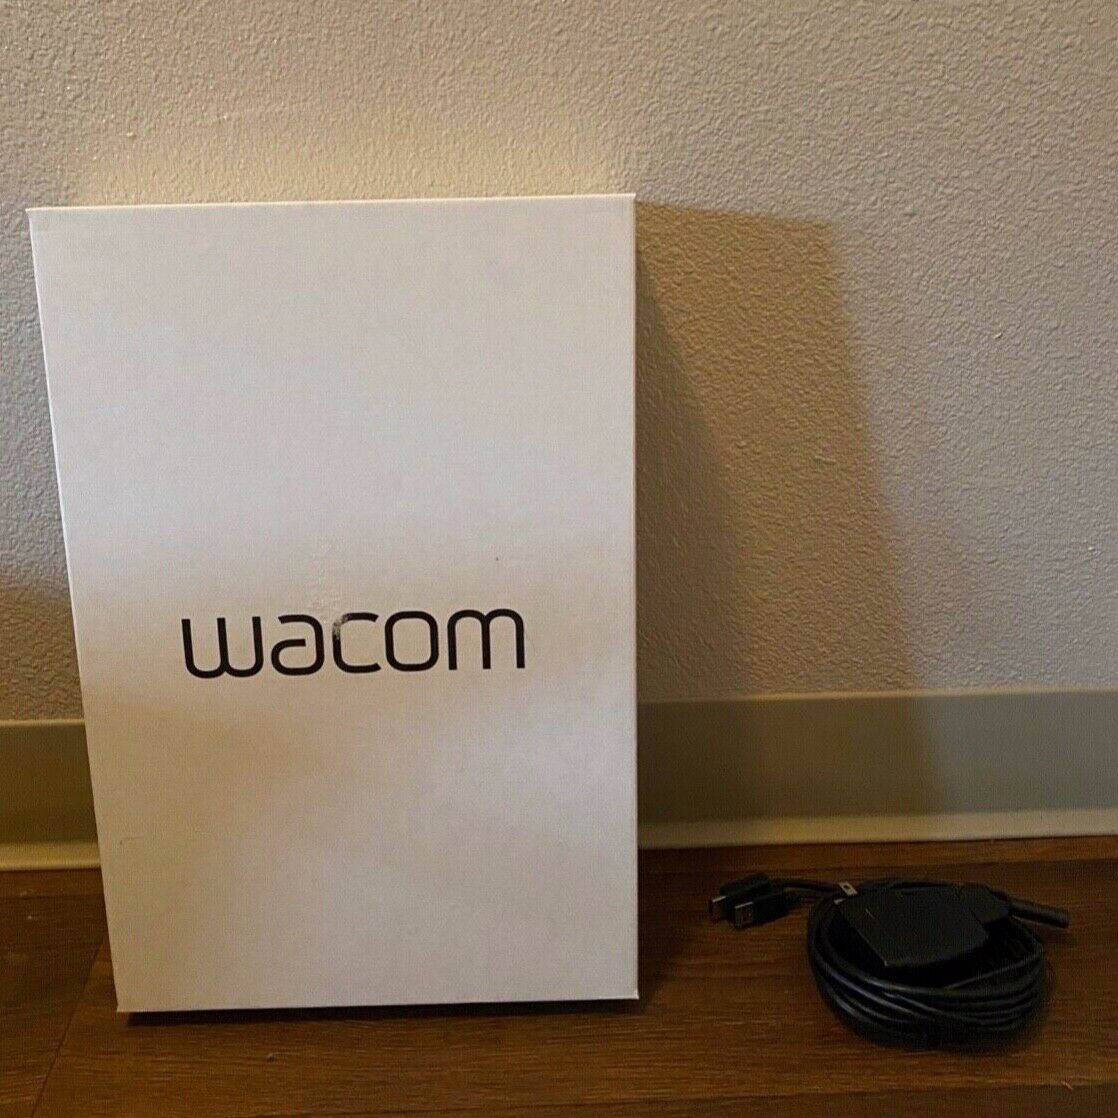 Wacom One 13.3 inch Graphics Tablet - Flint White (DTC133W0A) for 